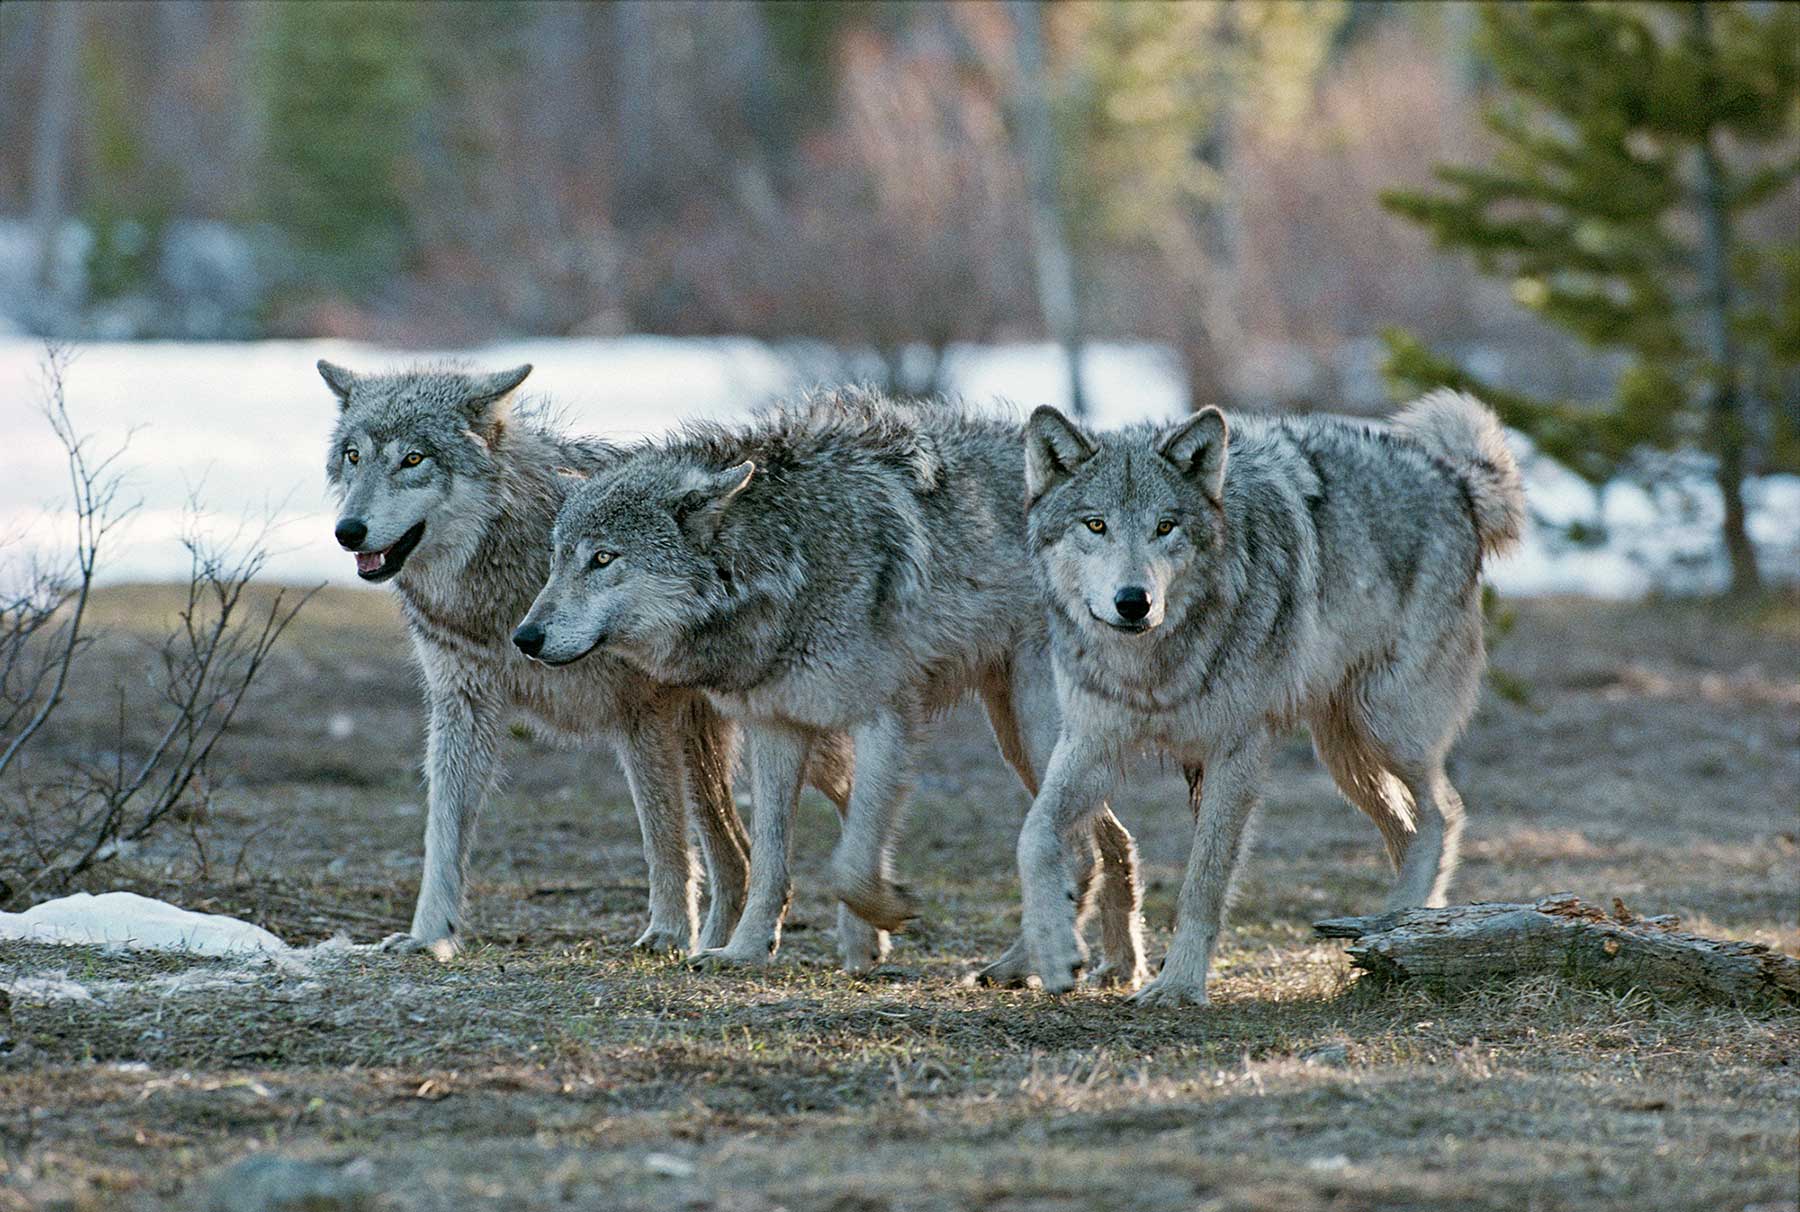 DID YOU KNOW? New laws escalate the war on wolves.